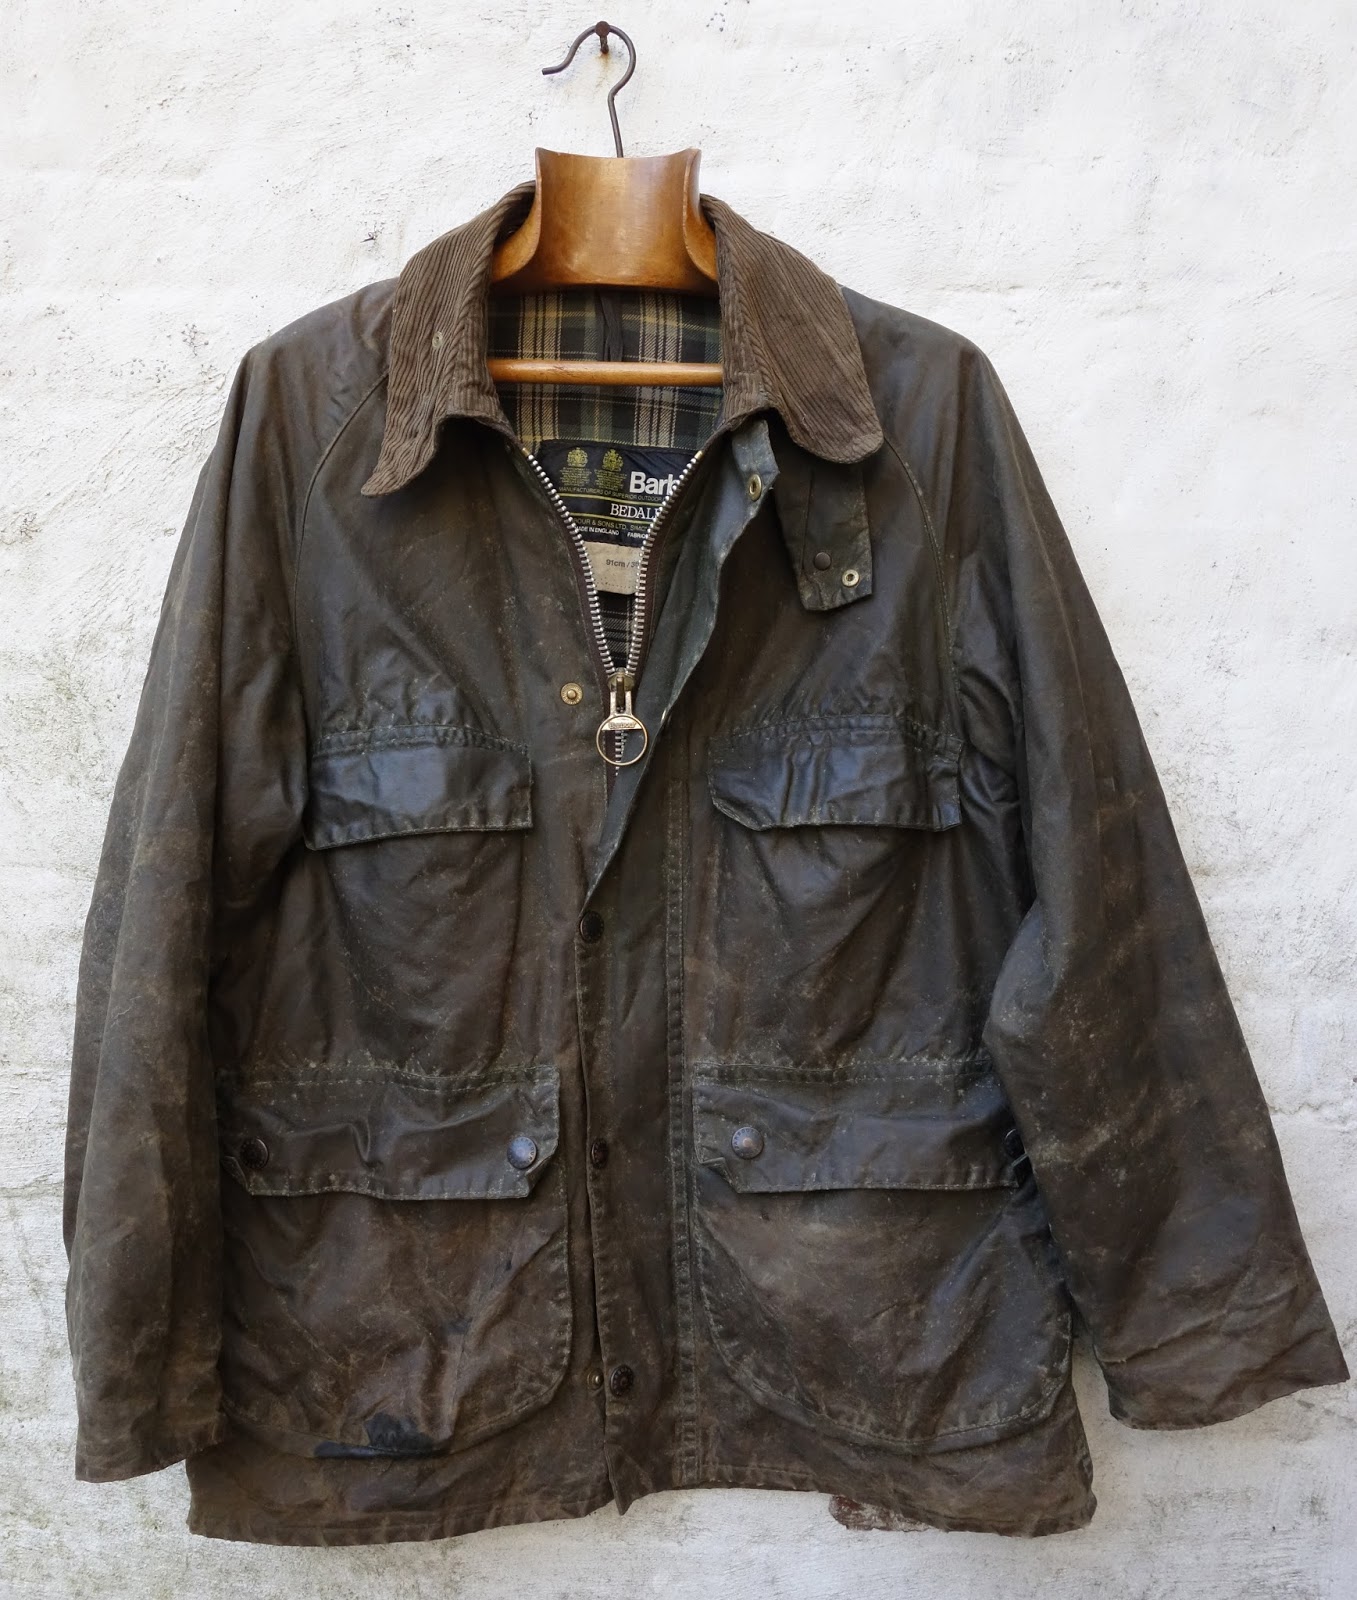 how to get smell out of barbour jacket